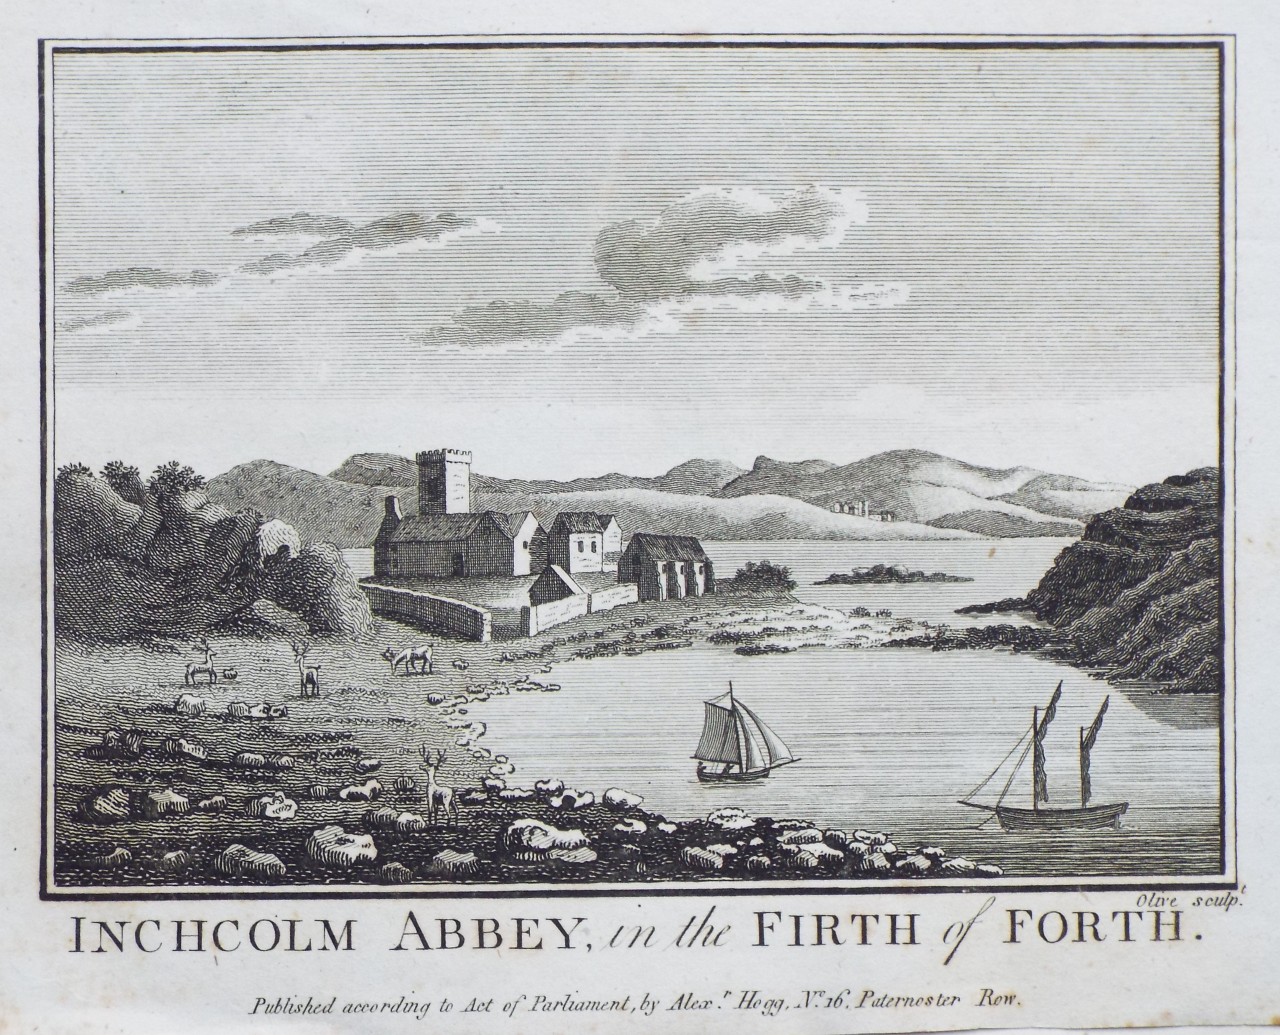 Print - Inchcolm Abbey, in the Firth of Forth. - 